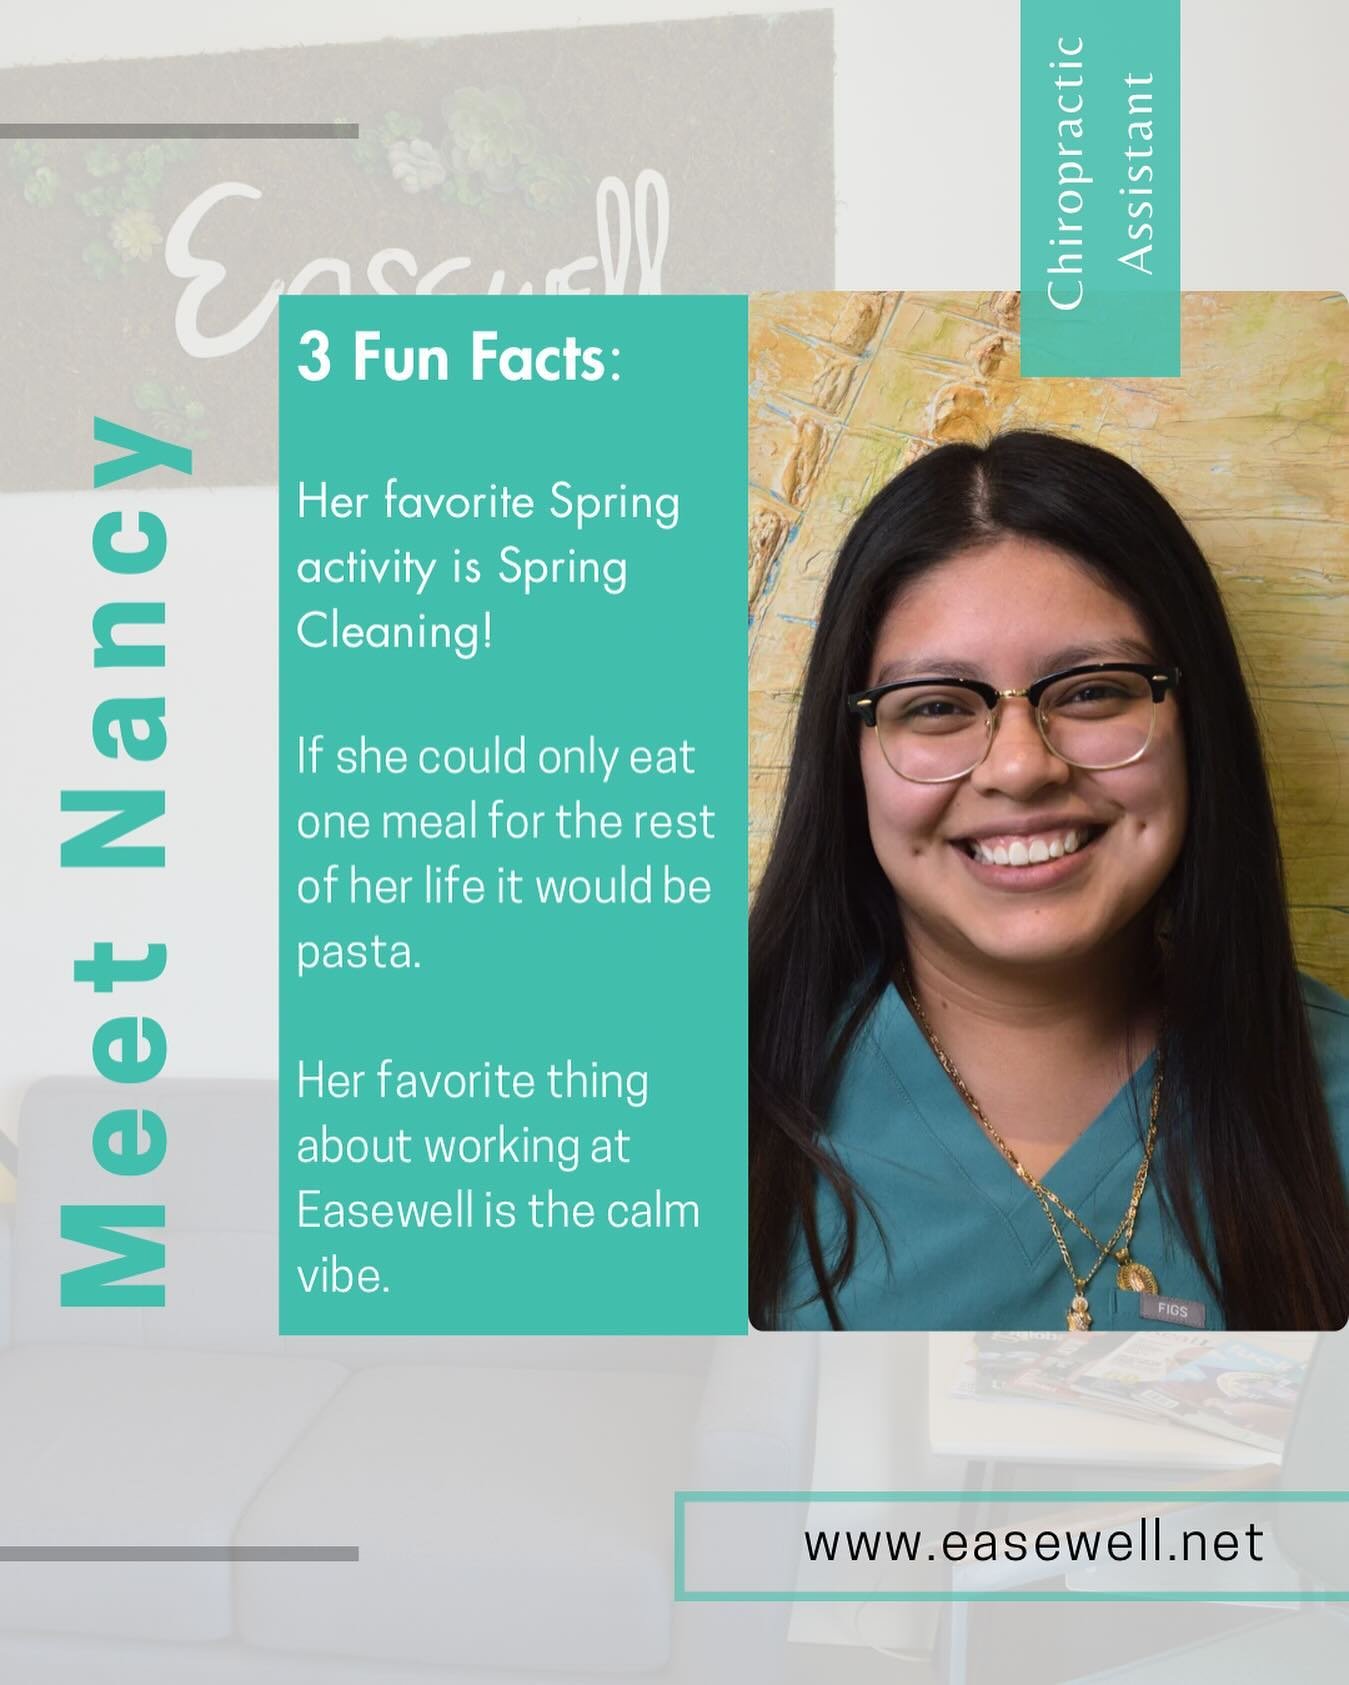 🌟 Meet Nancy - One of the smiling faces greeting patients at Easewell! 🌿  With a passion for wellness and a genuine care for each patient&rsquo;s experience, Nancy is here to ensure every visit is seamless and supportive. 

👉 Want to learn more ab